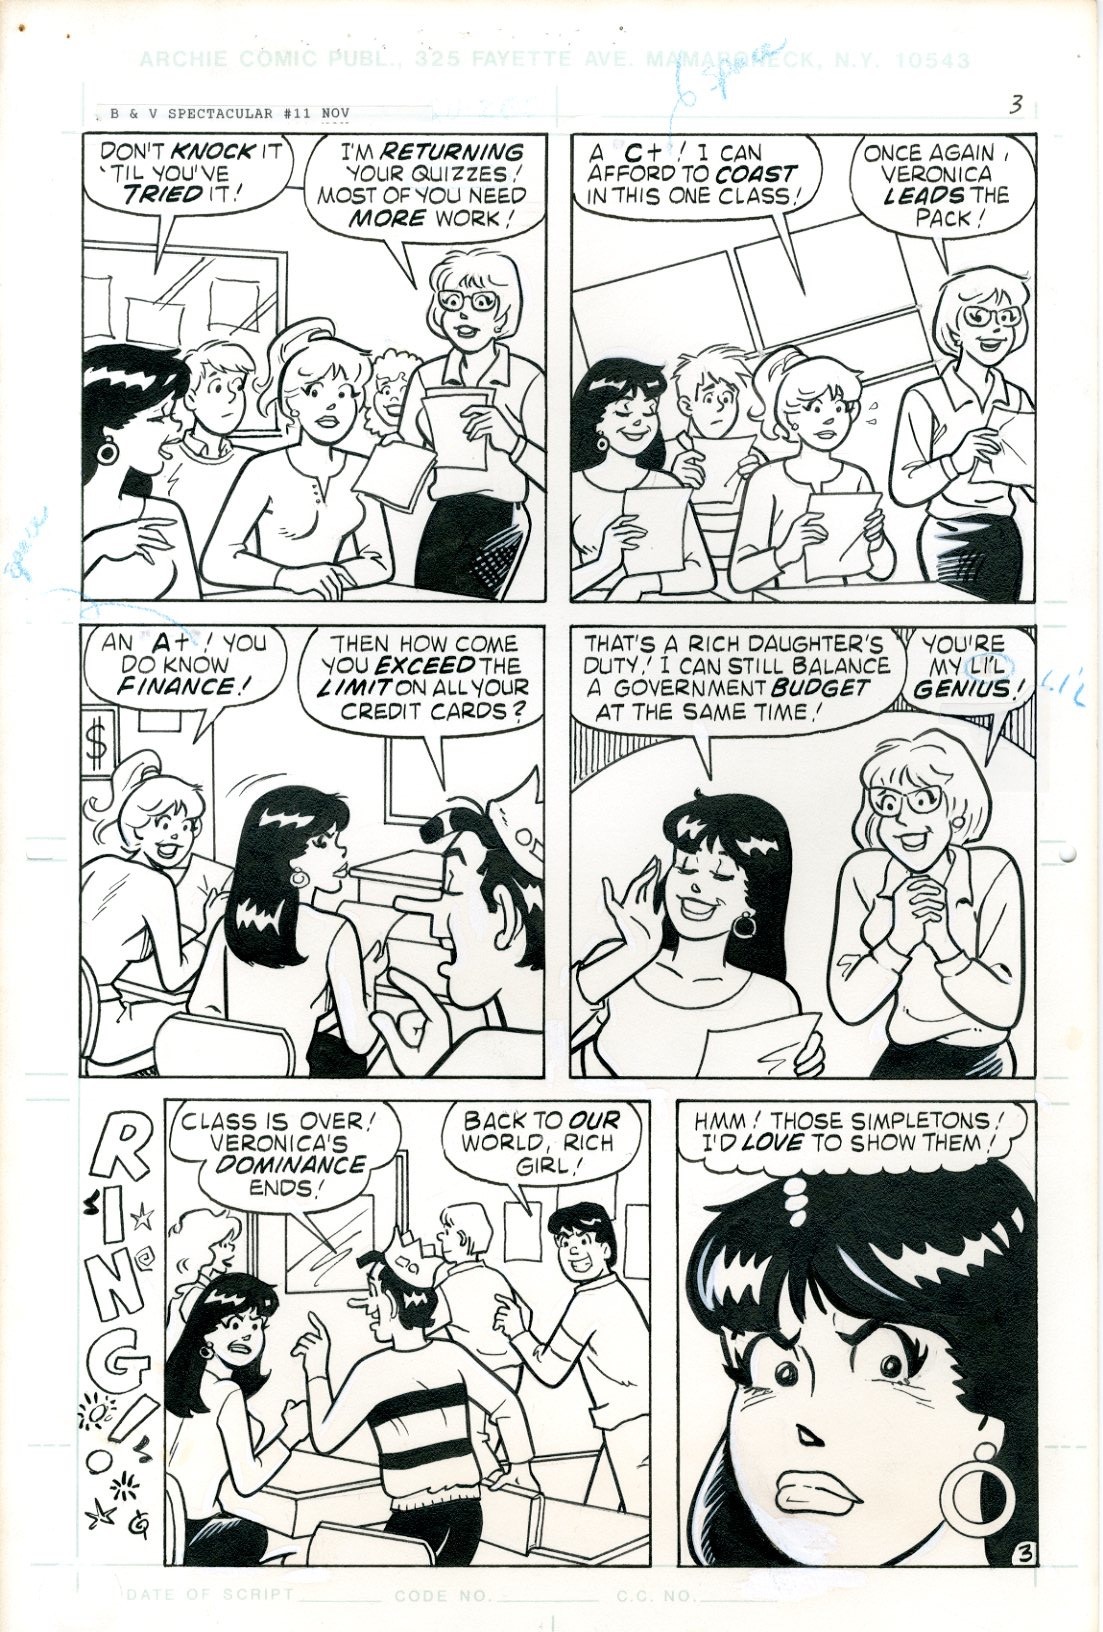 Betty &amp; Veronica Spectacular 5 Page Story - 3618